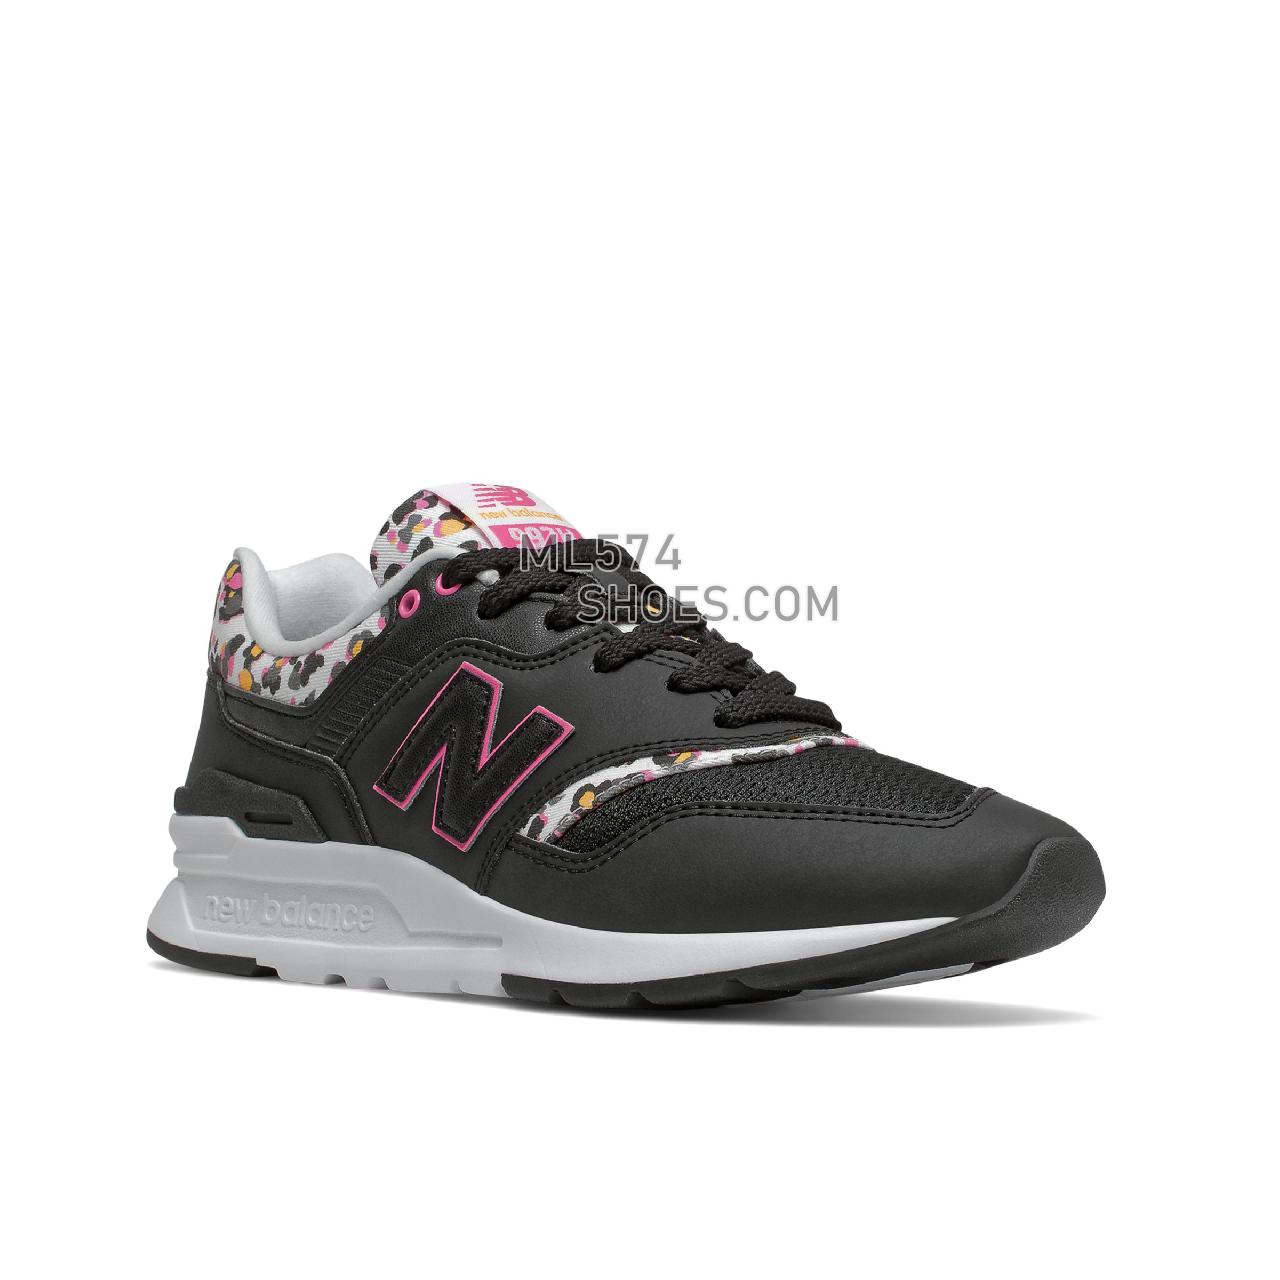 New Balance 997H - Women's Classic Sneakers - Black with White - CW997HGD